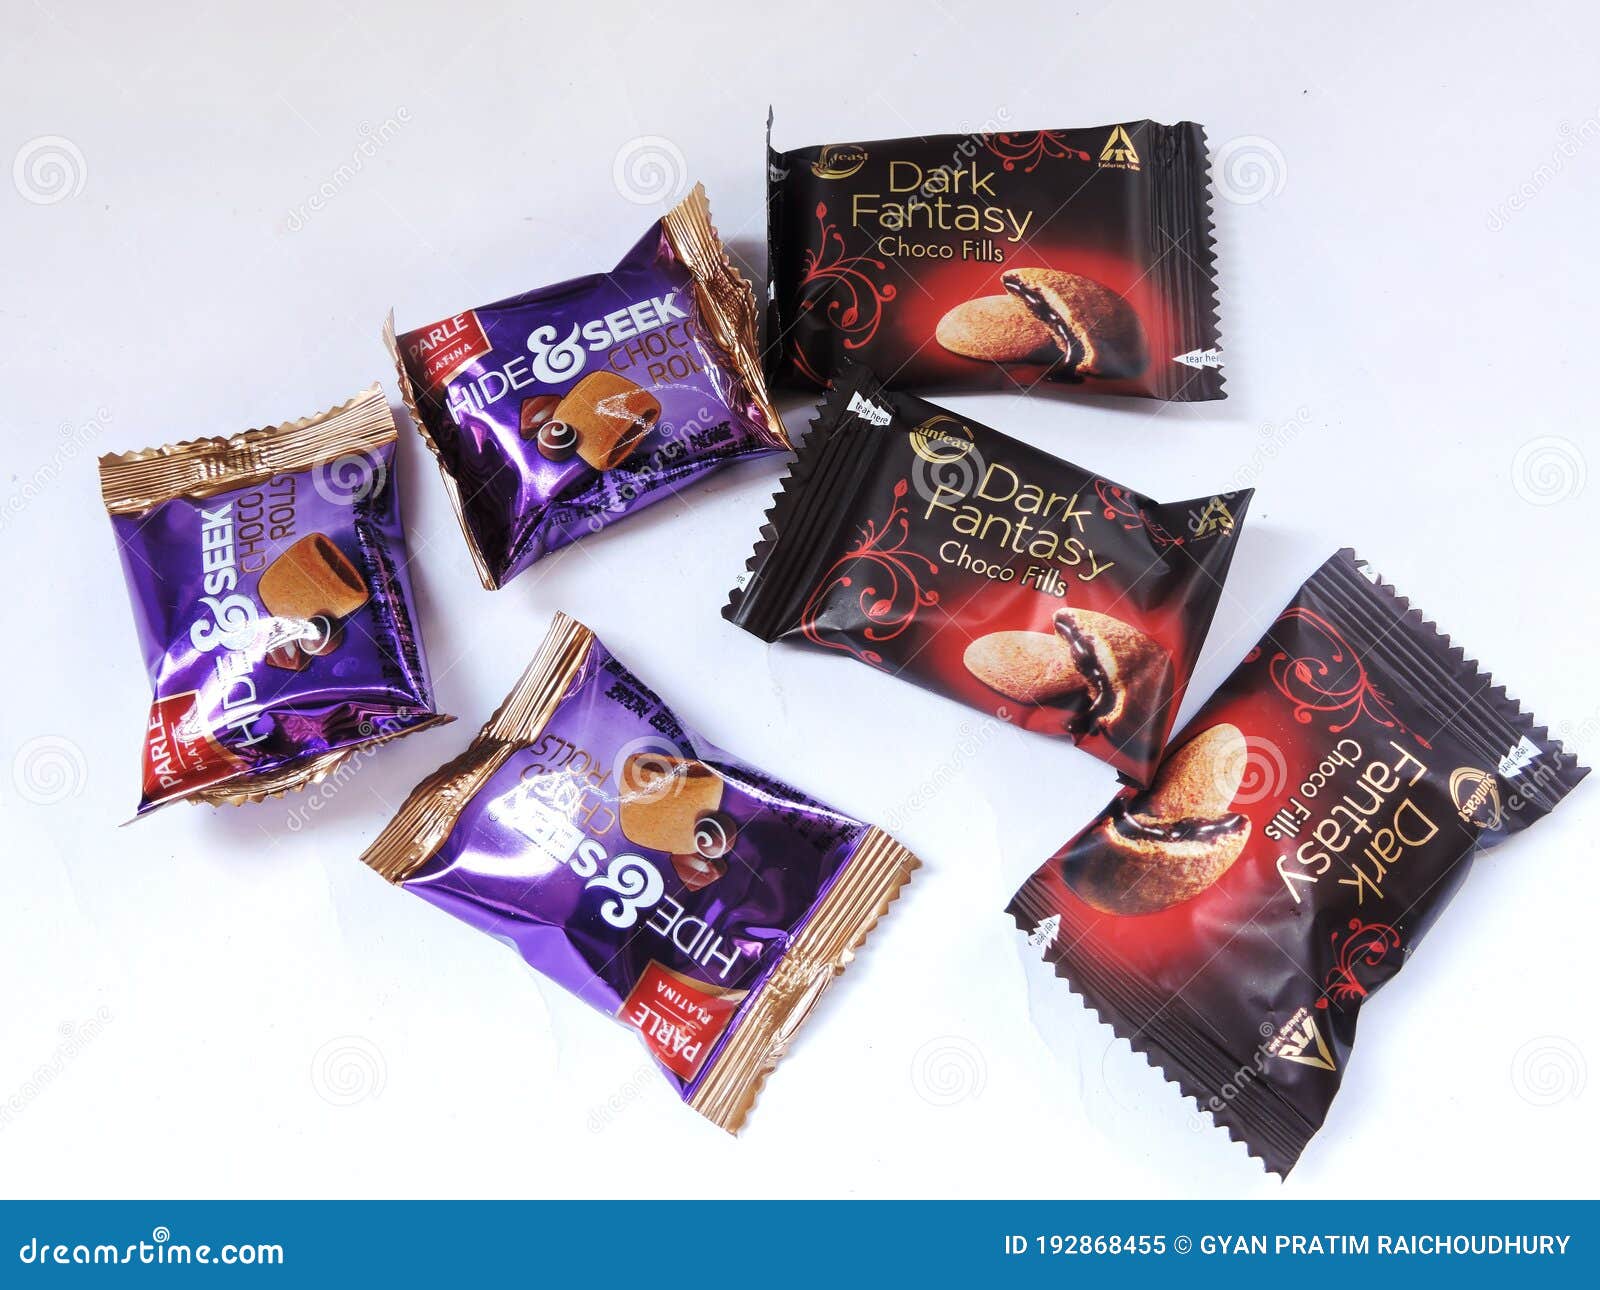 Hide And Seek Choco Rolls Vs Dark Fantasy Choco Fills Editorial Image Image Of Competition Consumption